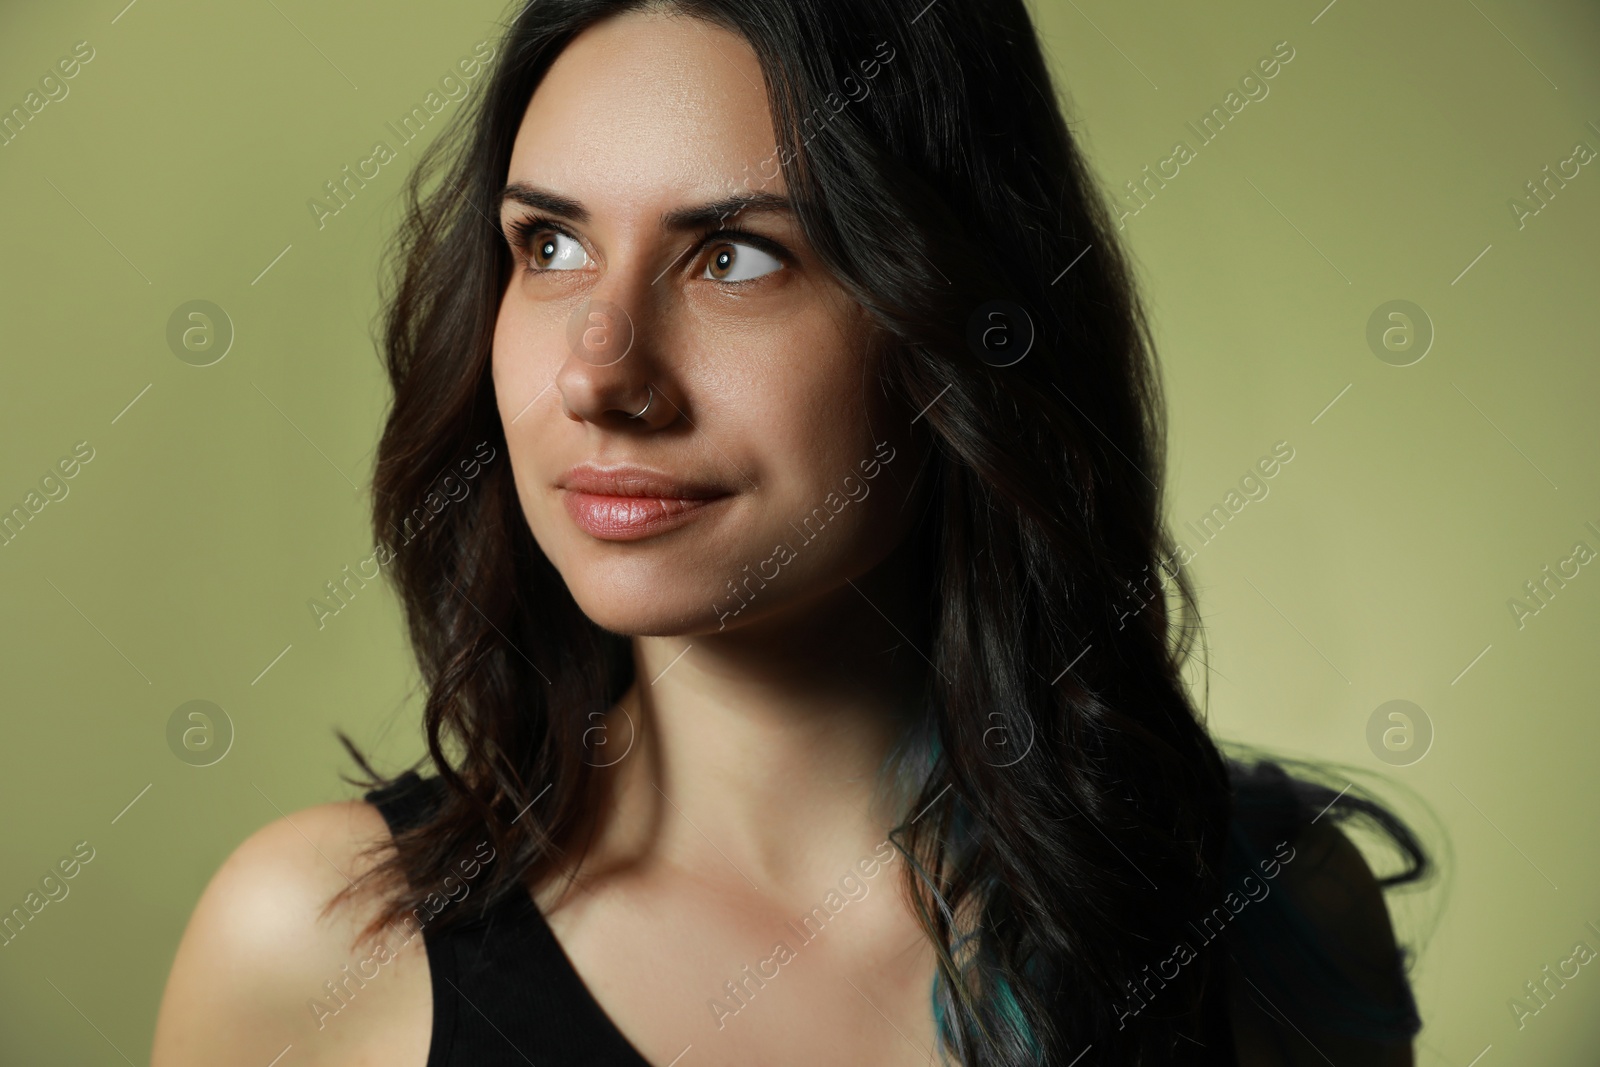 Photo of Beautiful young woman with nose piercing on green background